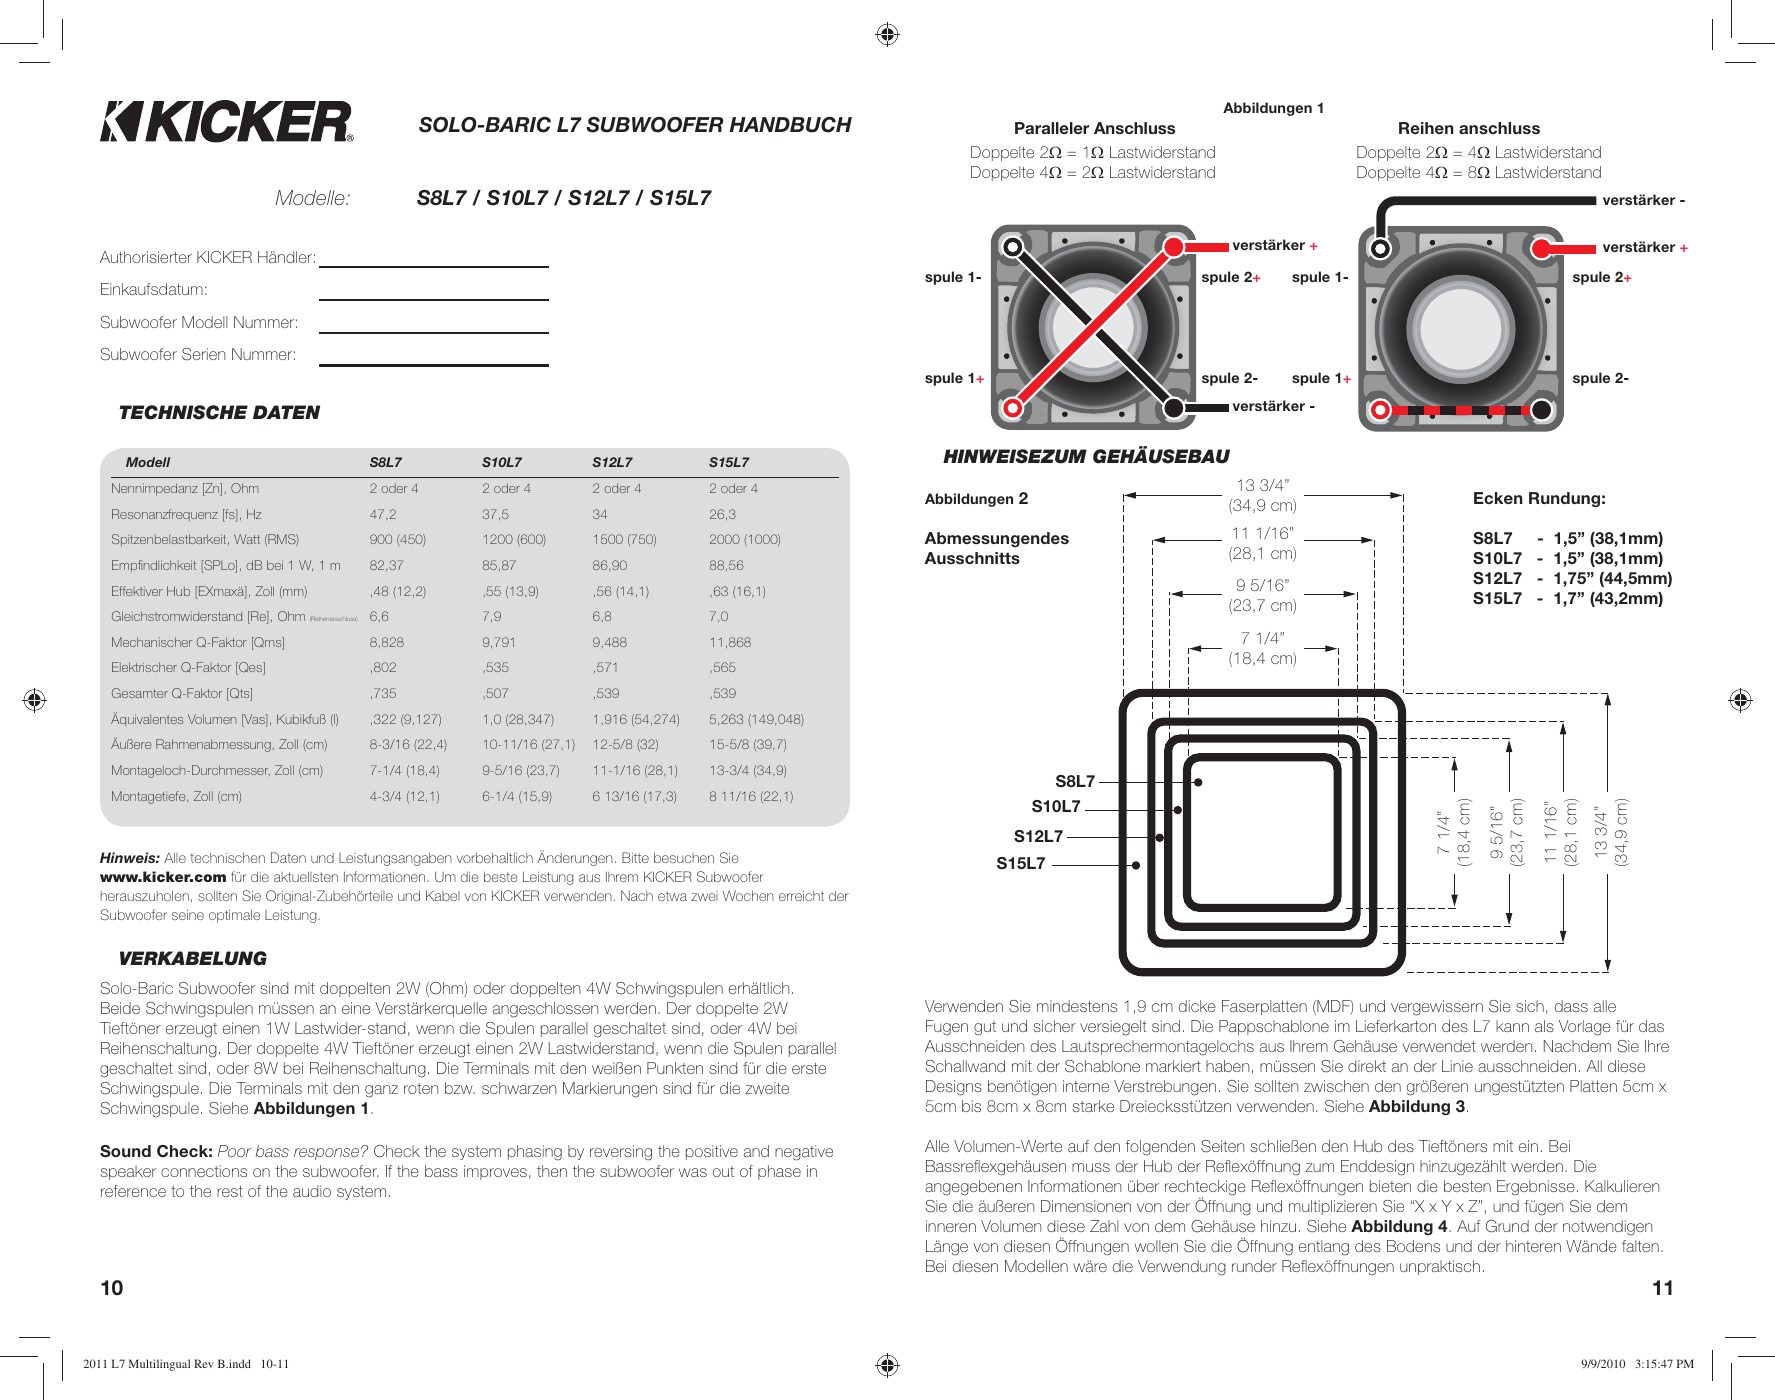 Page 6 of 11 - Kicker Kicker-2011-Solo-Baric-L7-Owners-Manual- 2011 L7 Multilingual Rev B  Kicker-2011-solo-baric-l7-owners-manual